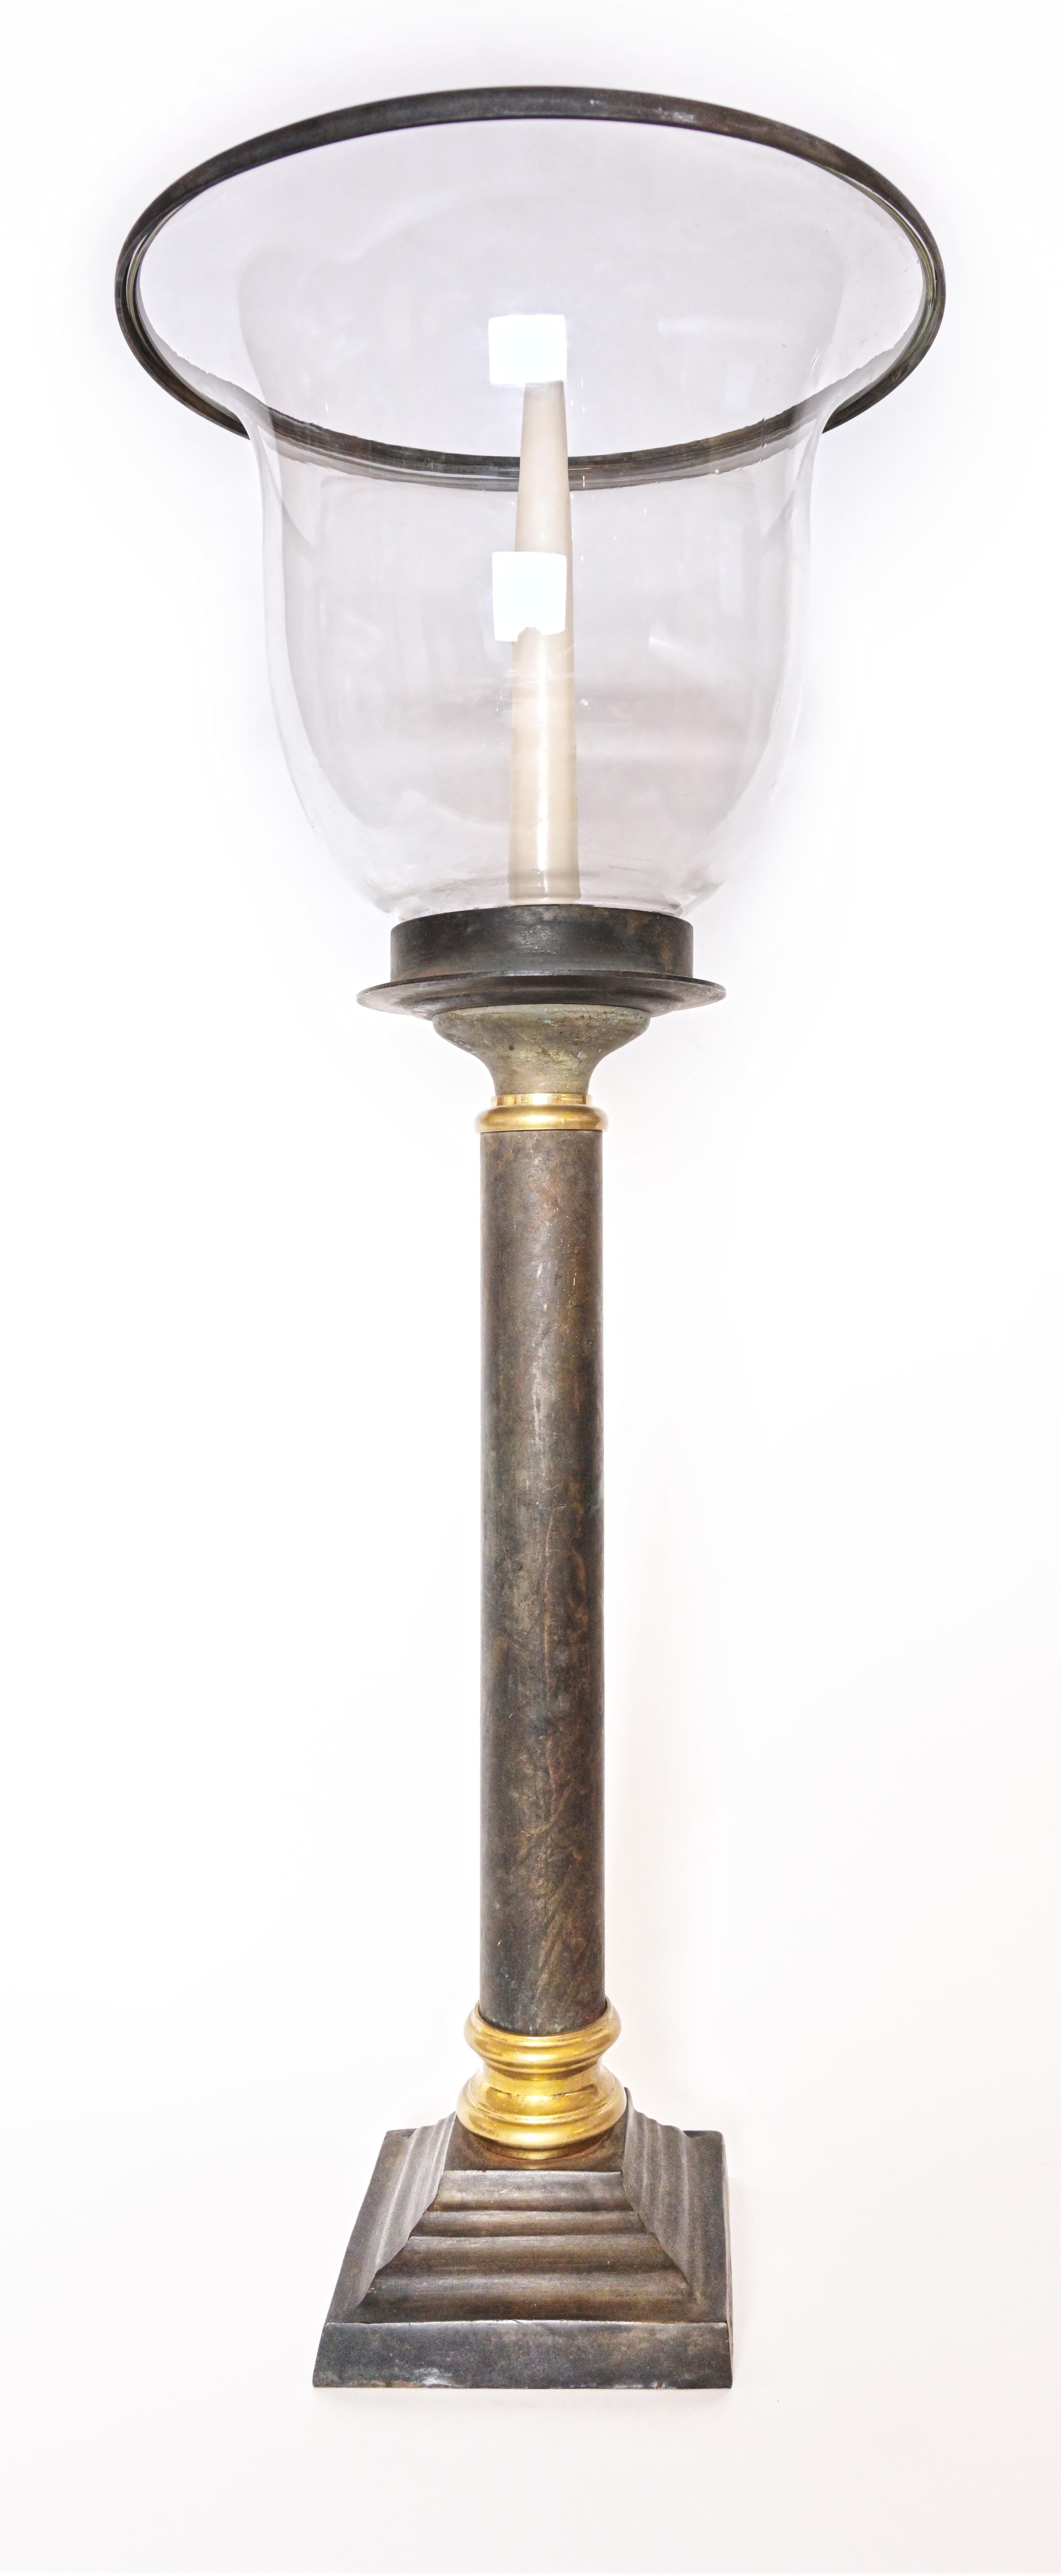 A pair of Votive lanterns having an upturned glass shade resting upon a bronze pillared stem with brass accents along the top and base, circa 1920s.